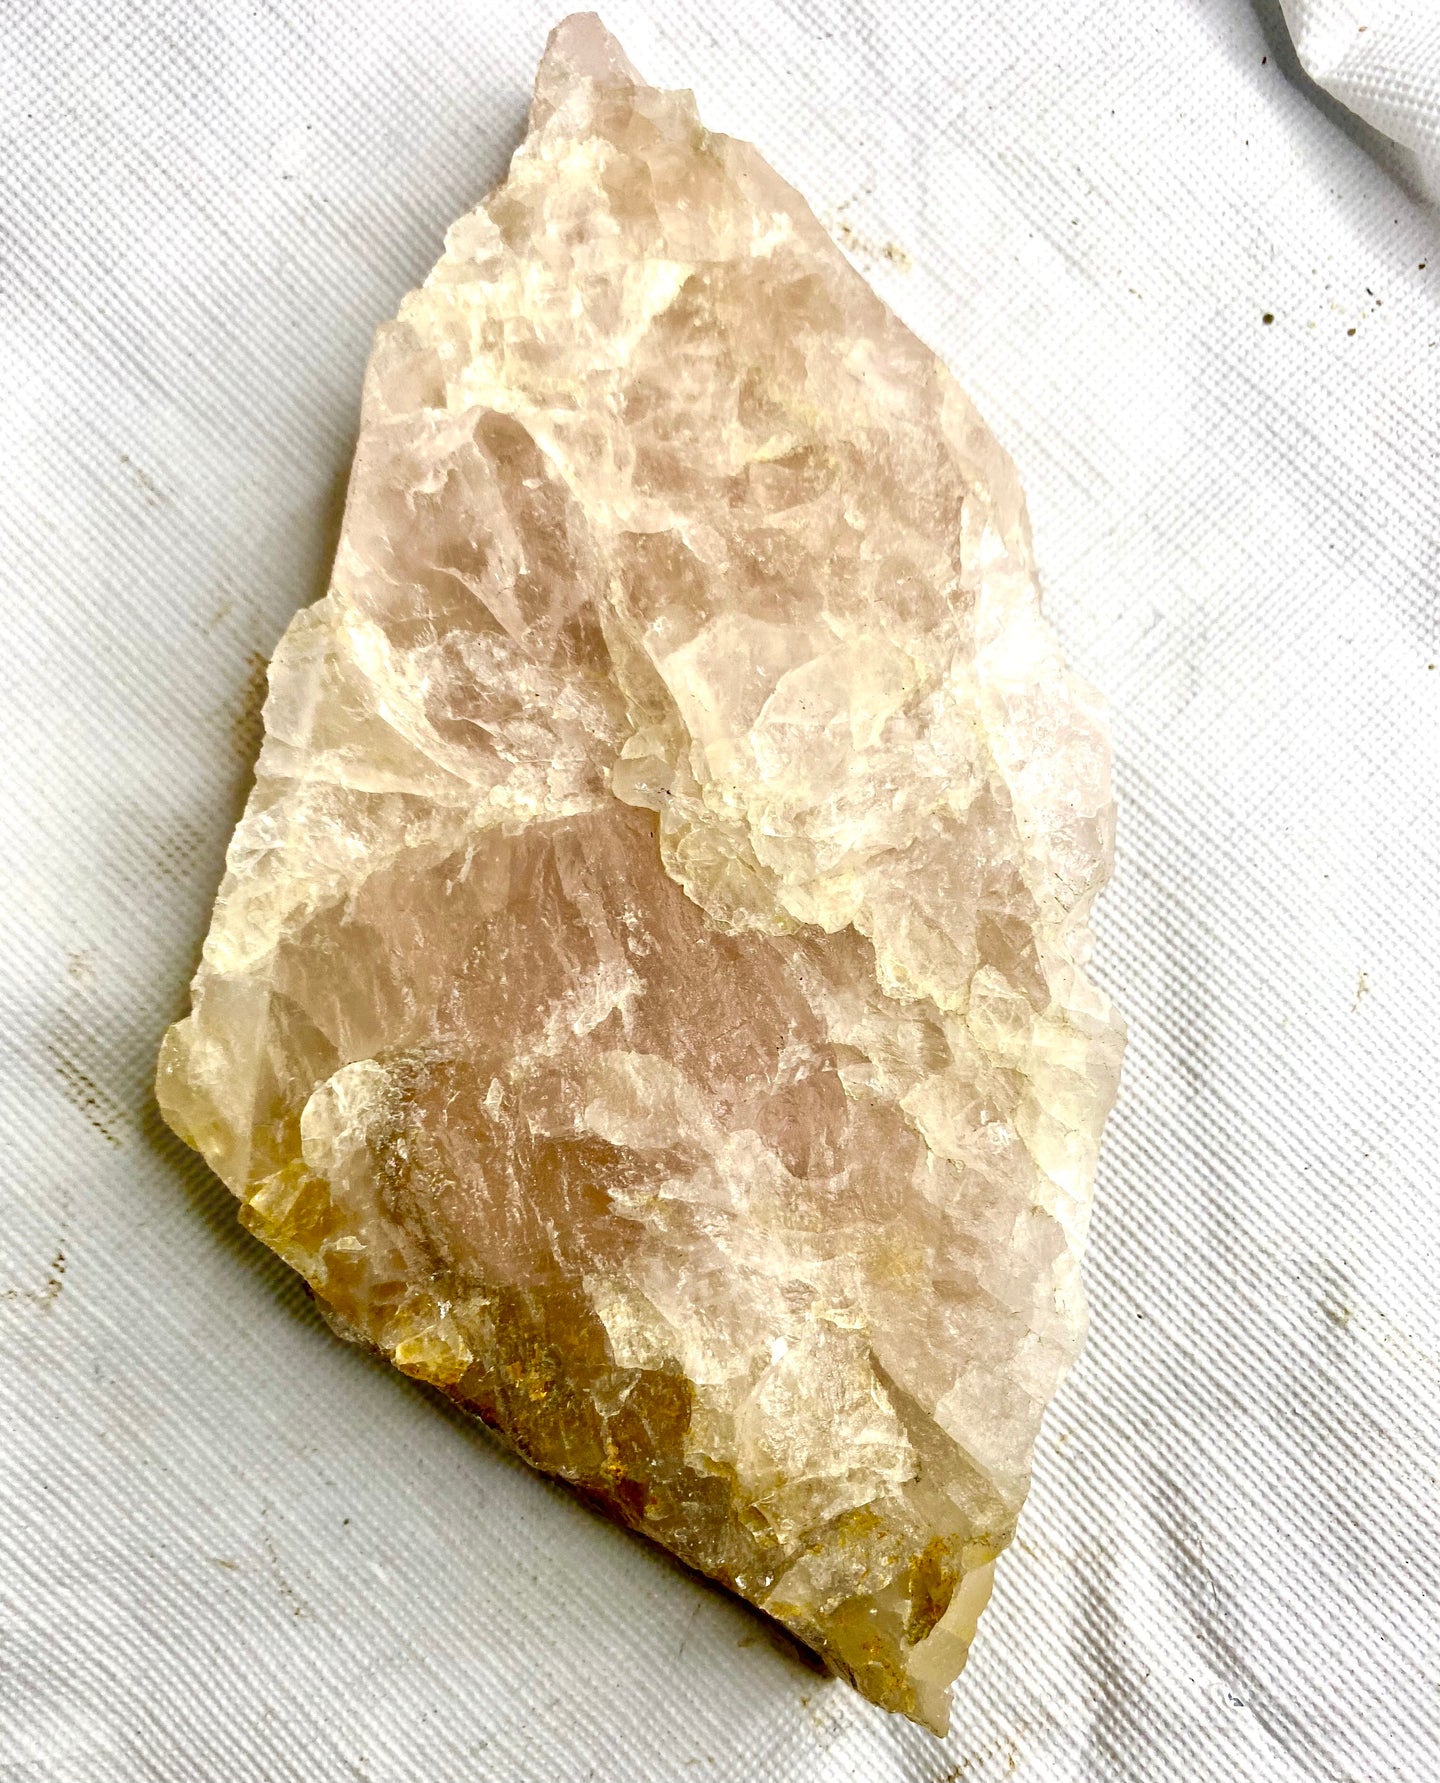 Rose Quartz from Alstead, New Hampshire for Sale - Fossil Daddy